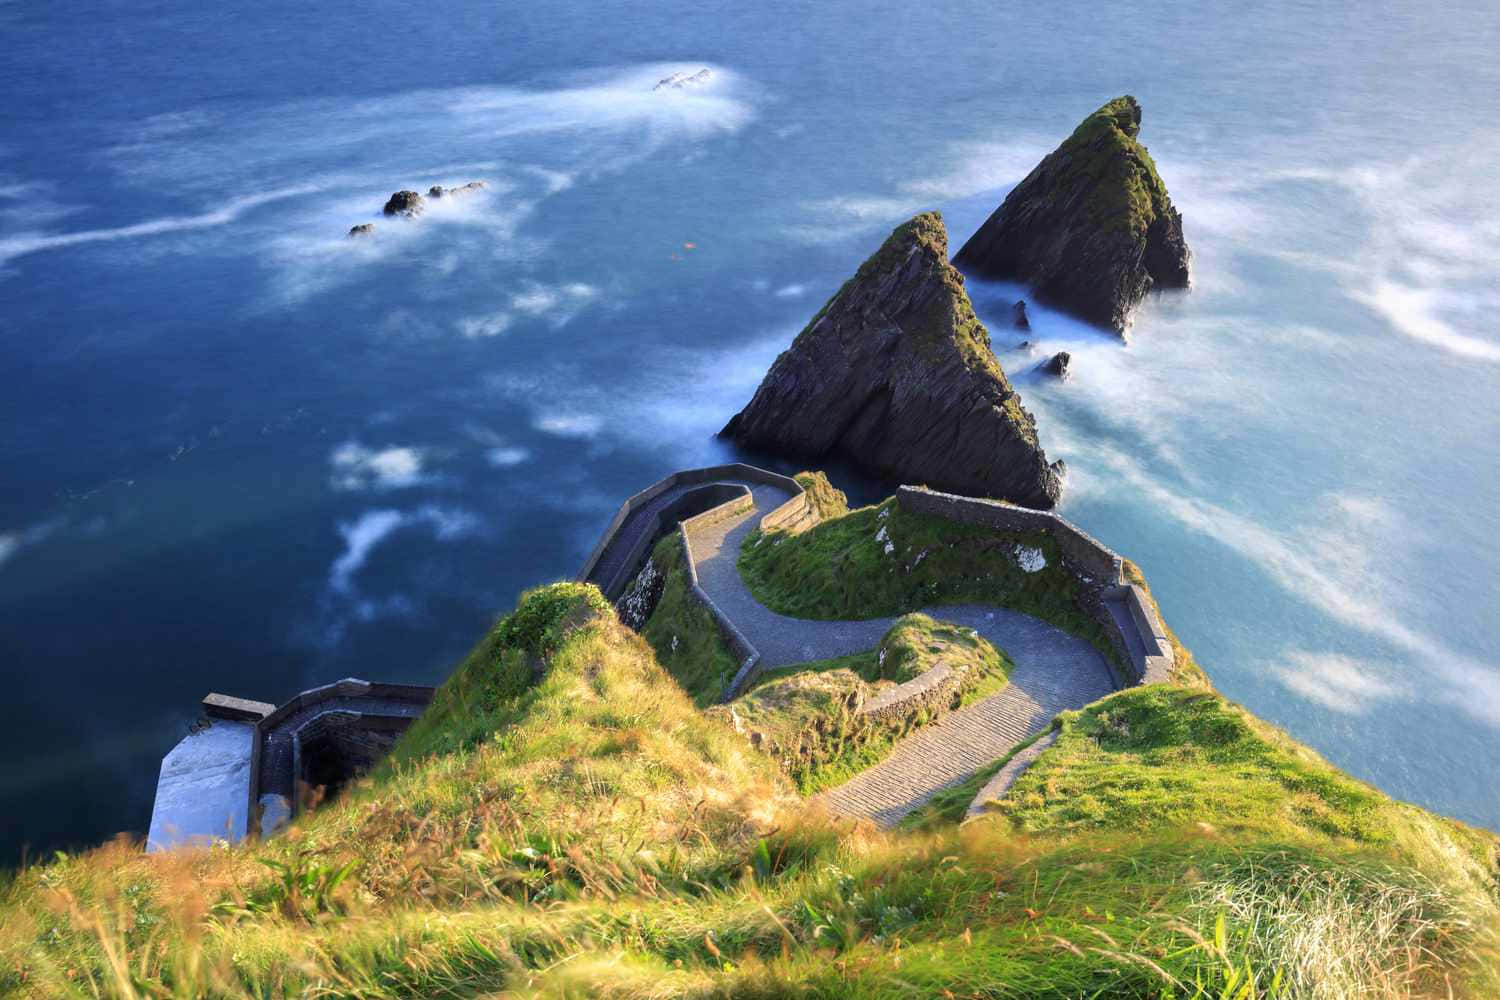 Steeped in history and beauty, Ireland awaits travelers looking to explore its landscapes and culture.